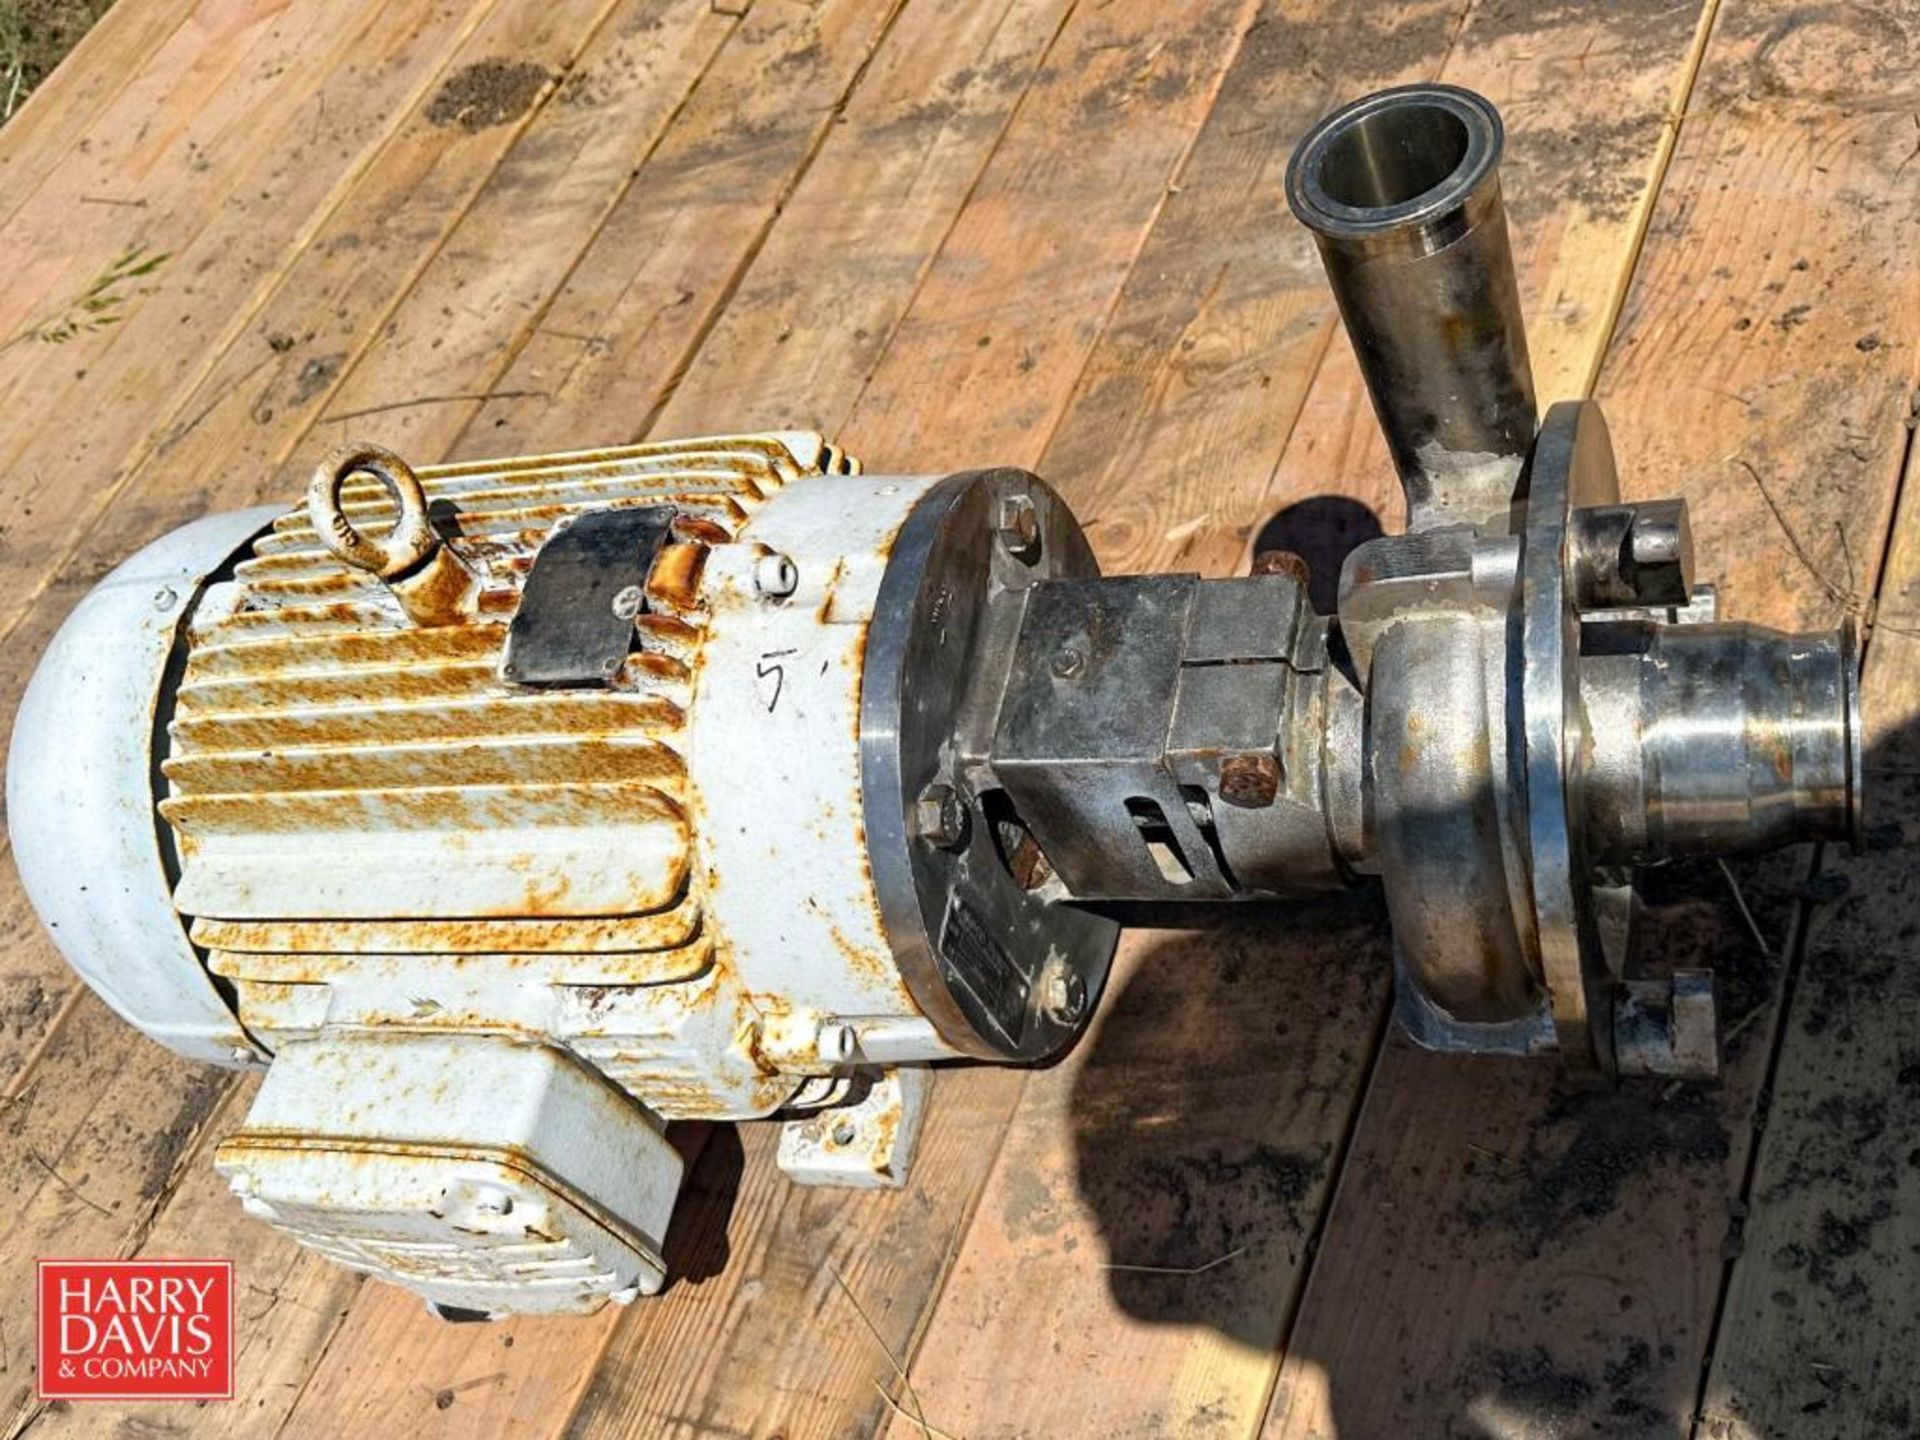 Ampco Centrifugal Pump - Rigging Fee: $75 - Image 2 of 5